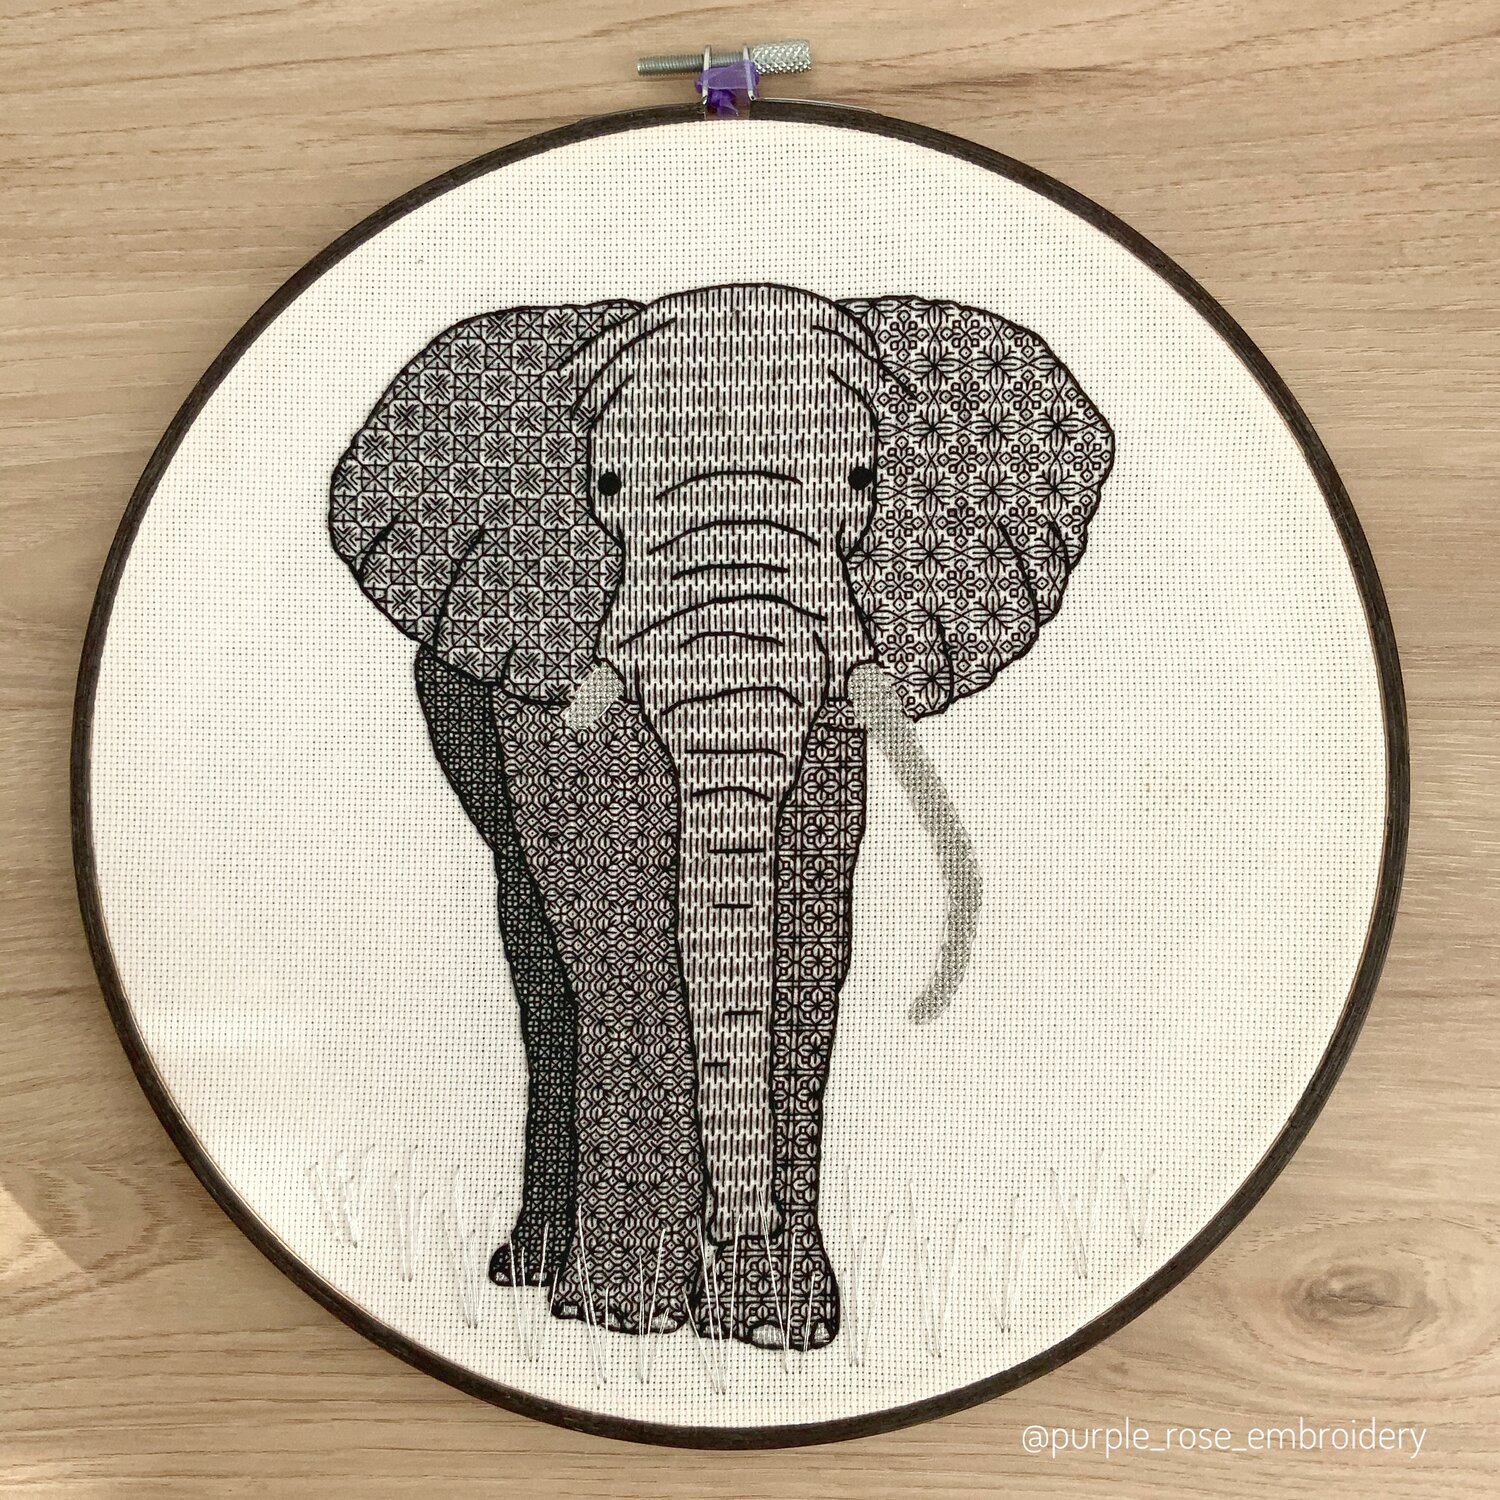 Five pens for transferring embroidery patterns — Embellished Elephant